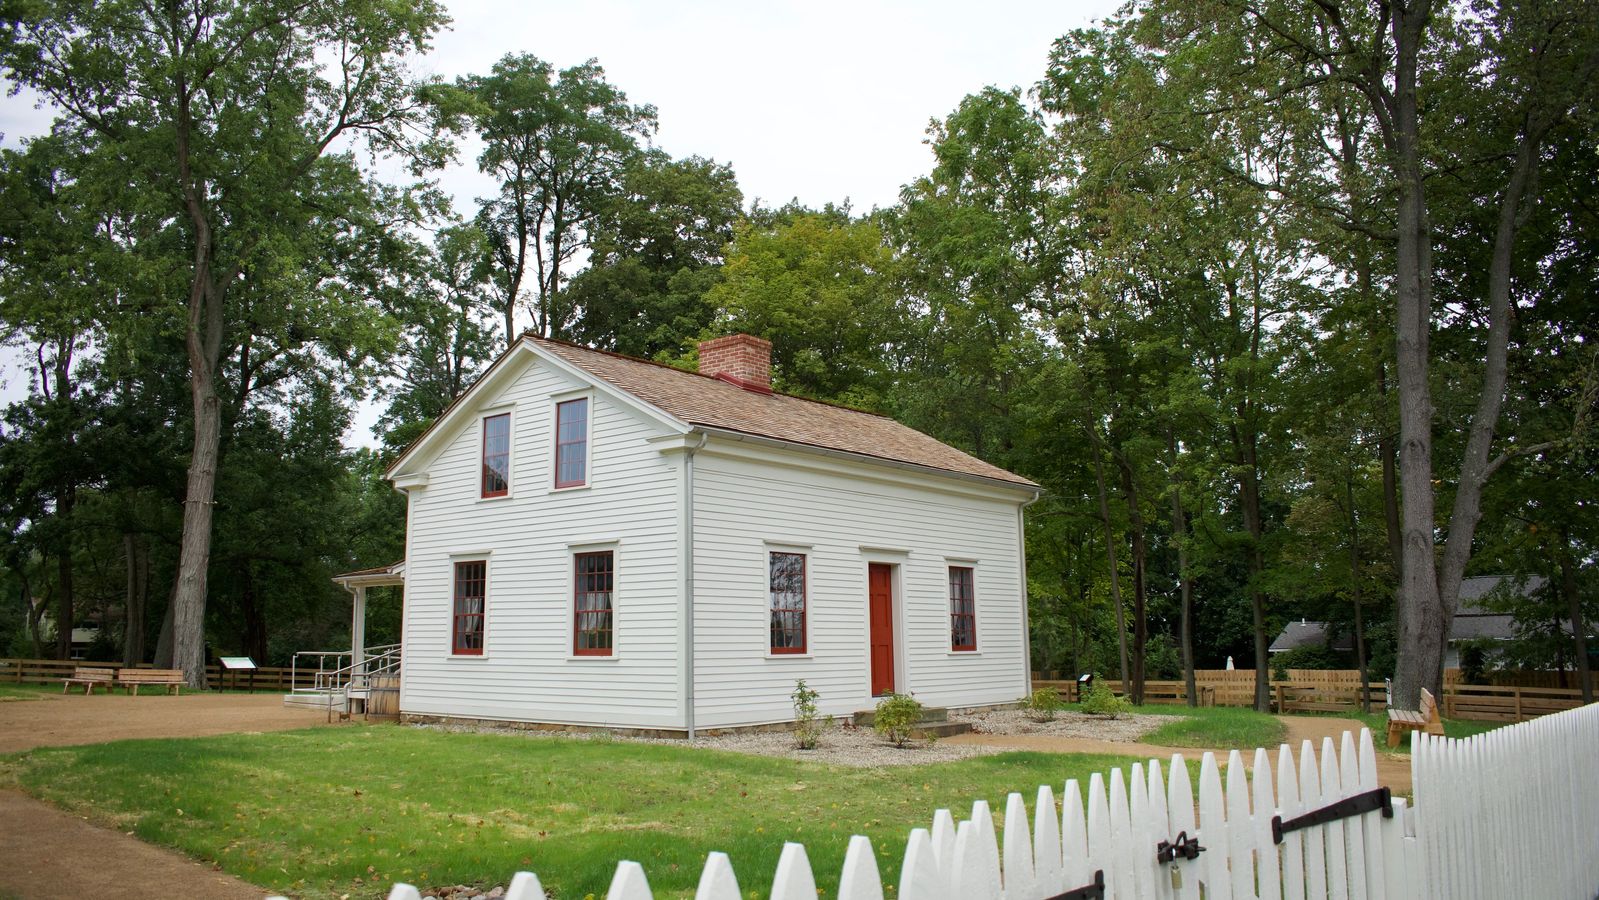 The restored home of Joseph and Emma Smith in Kirtland, Ohio. The home was dedicated on Saturday, August 26, 2023, by David A. Bednar of the Quorum of the Twelve Apostles of The Church of Jesus Christ of Latter-day Saints.